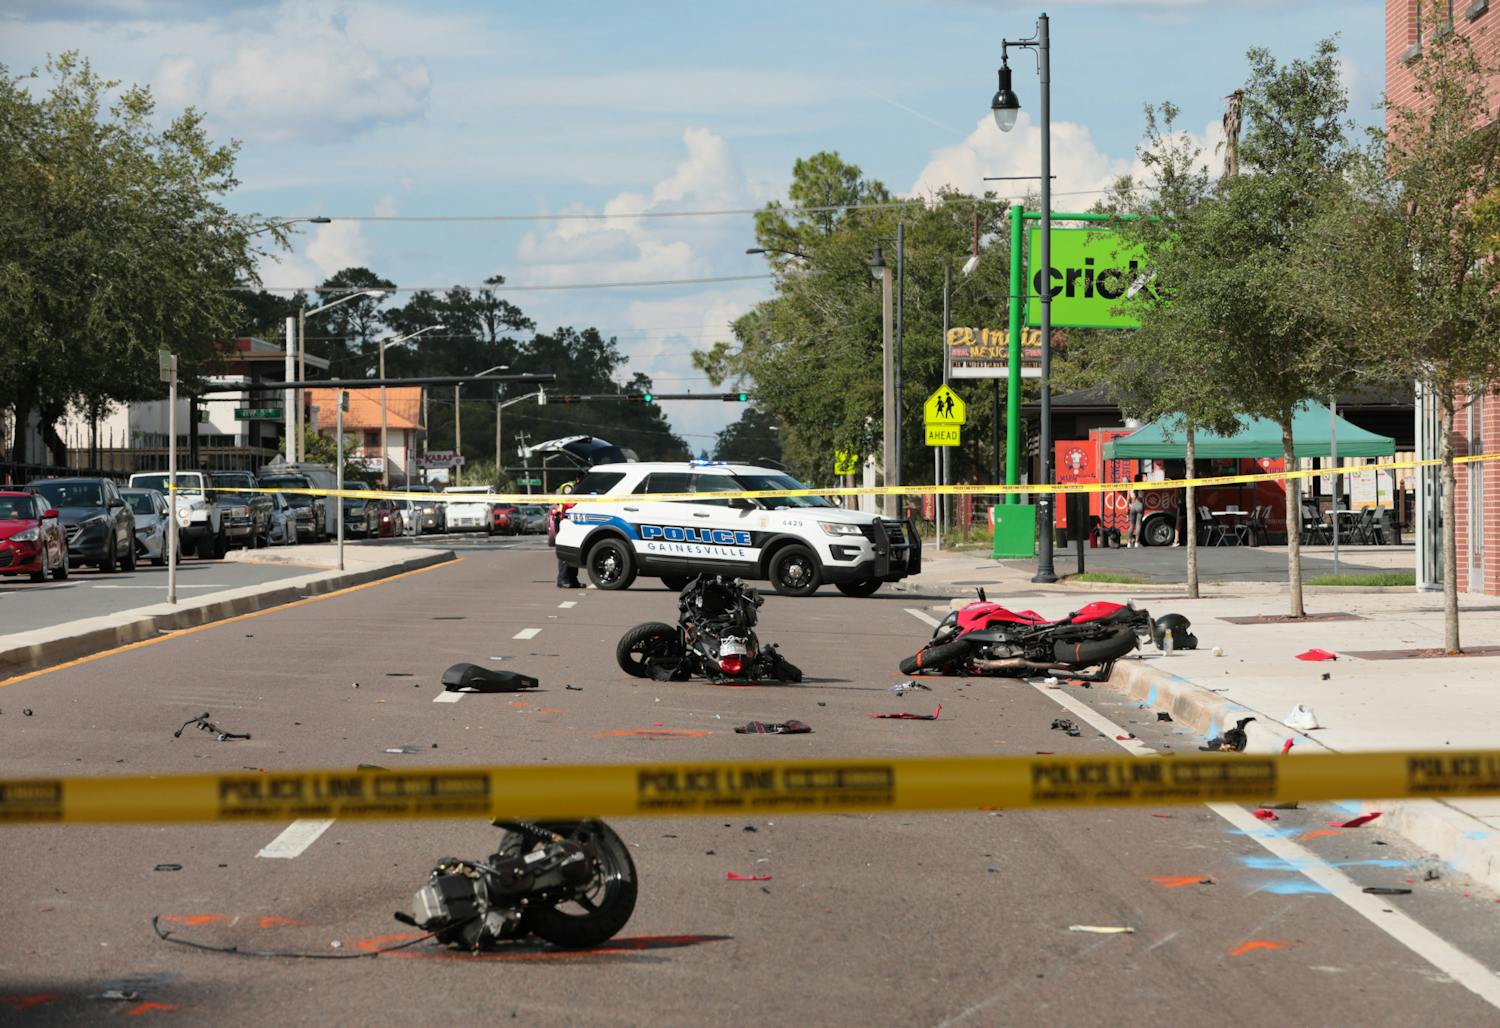 Remnants of a motorcycle accident are seen on the corner of 3rd Avenue and West University Avenue in front of Krispy Kreme on Friday, Oct. 1, 2021.